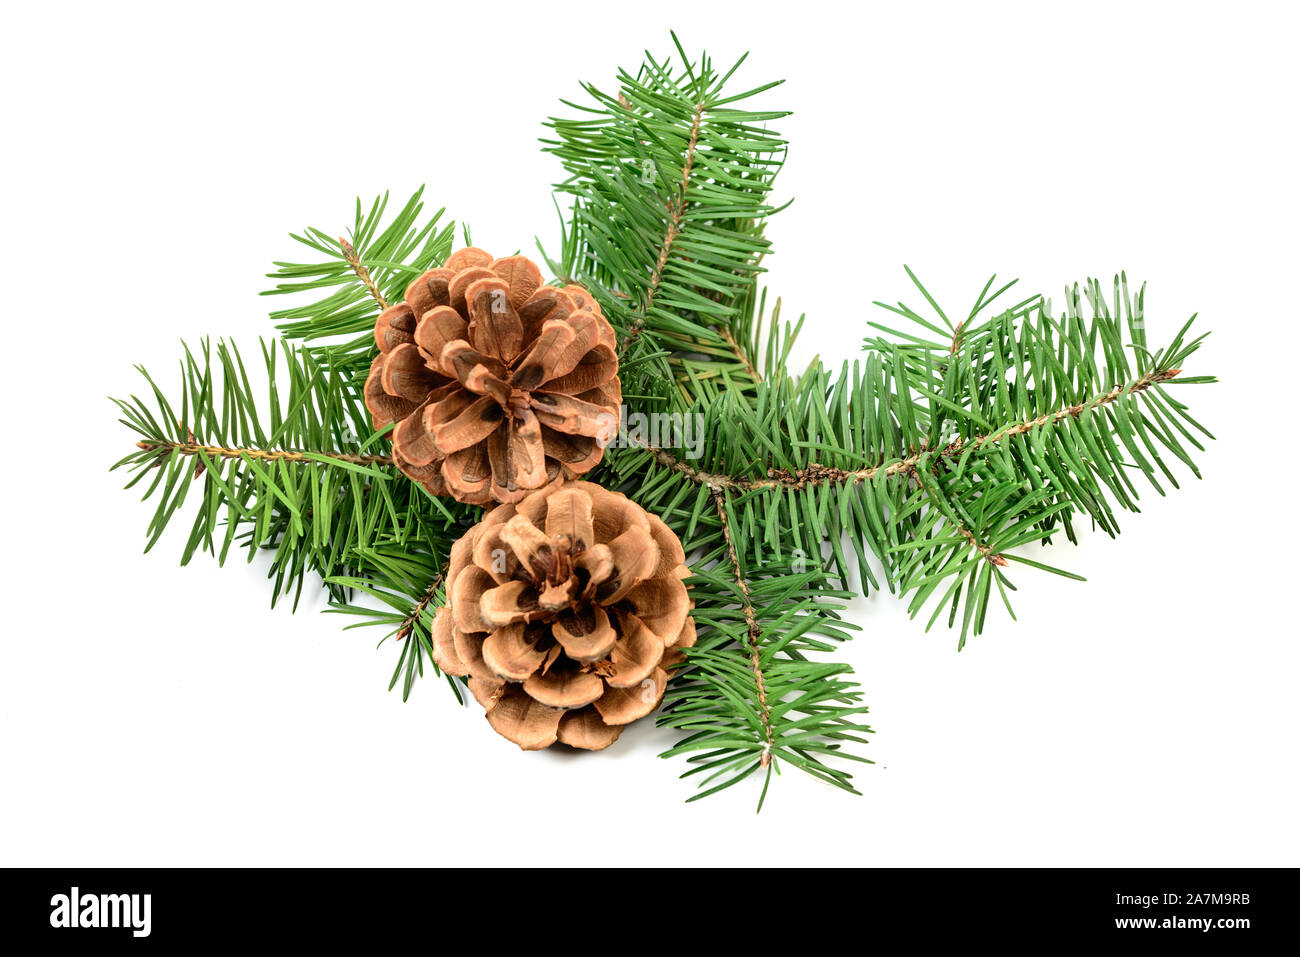 Pine cones with Christmas tree branch on a white background Stock Photo